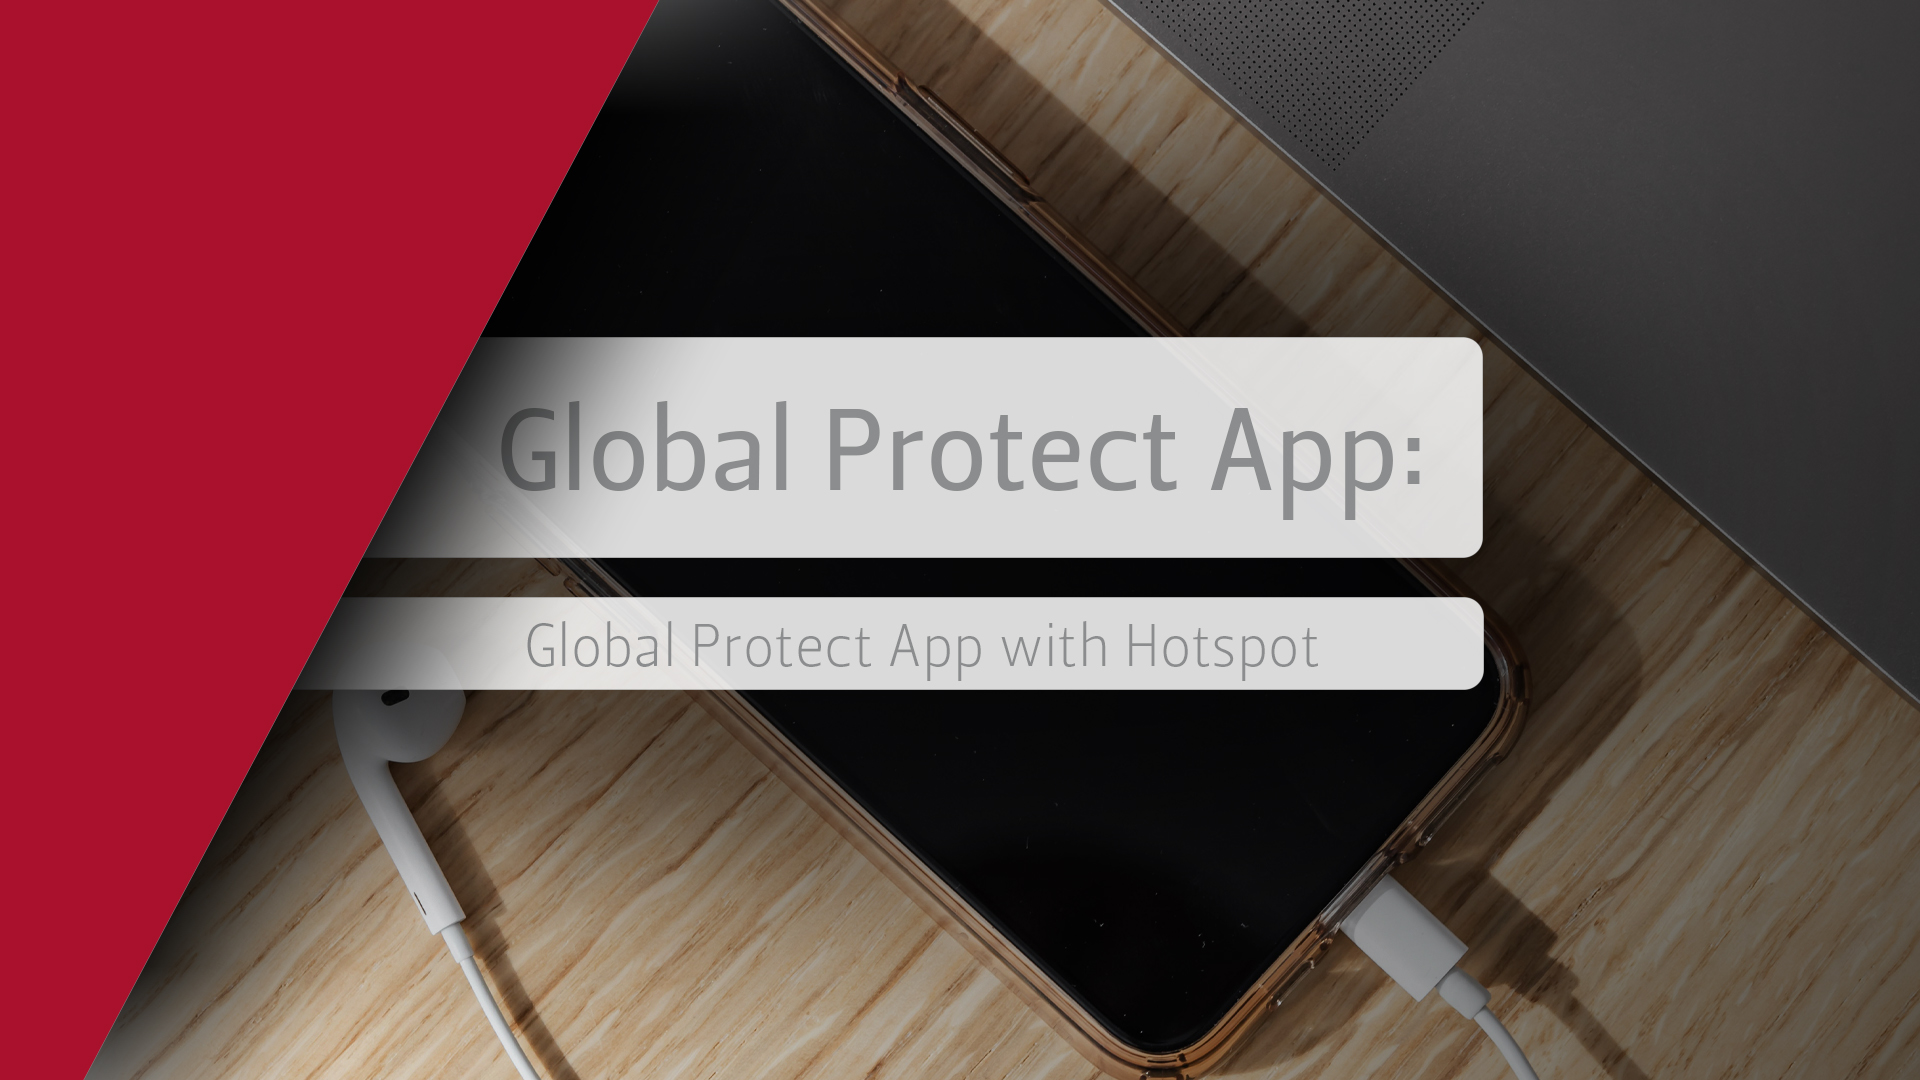 Global Protect App with Hotspot